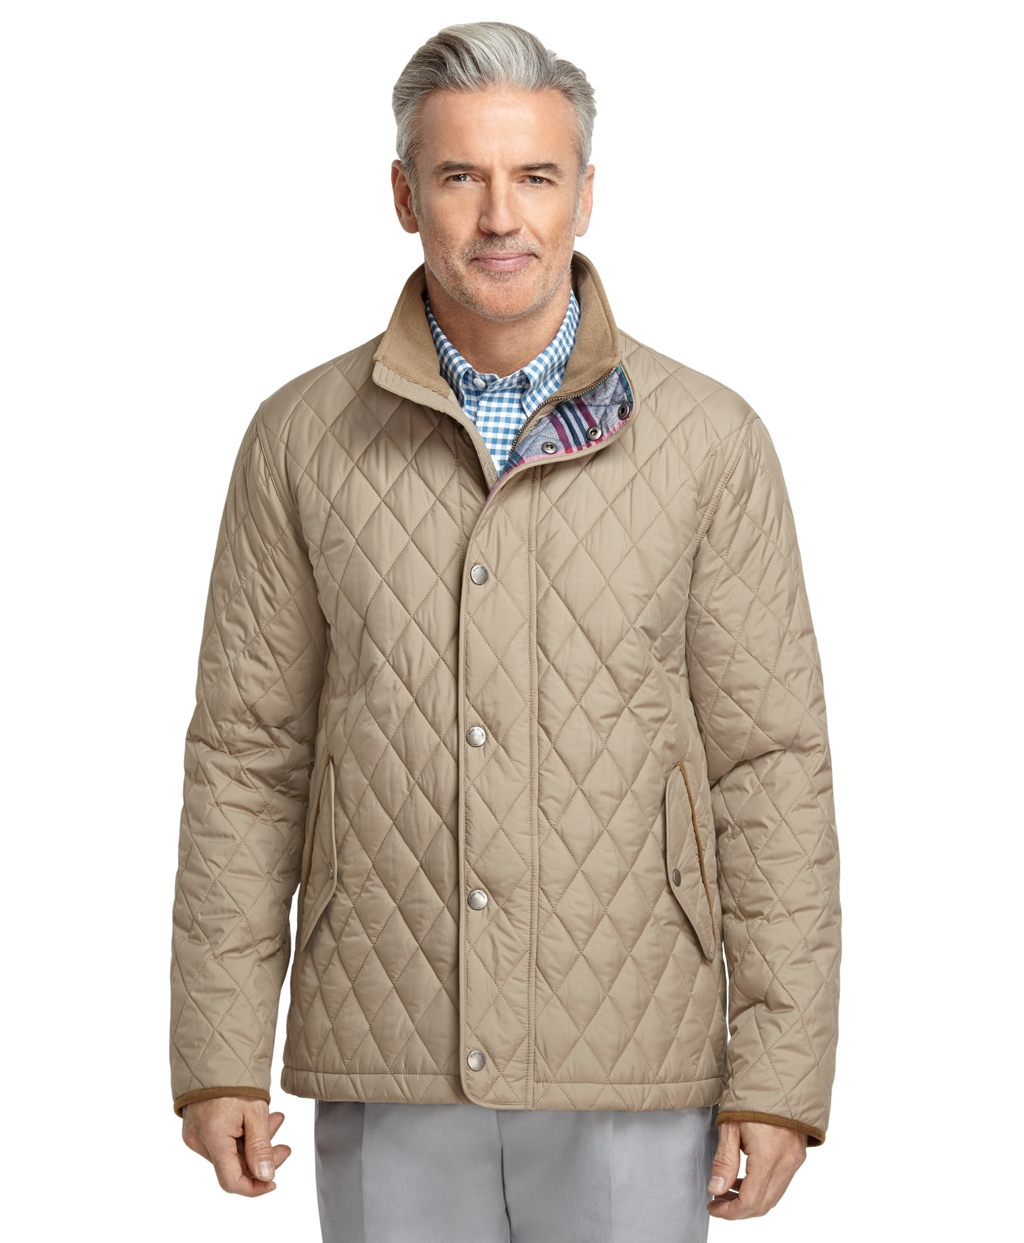 Lyst - Brooks Brothers Spring Quilted Jacket in Natural for Men